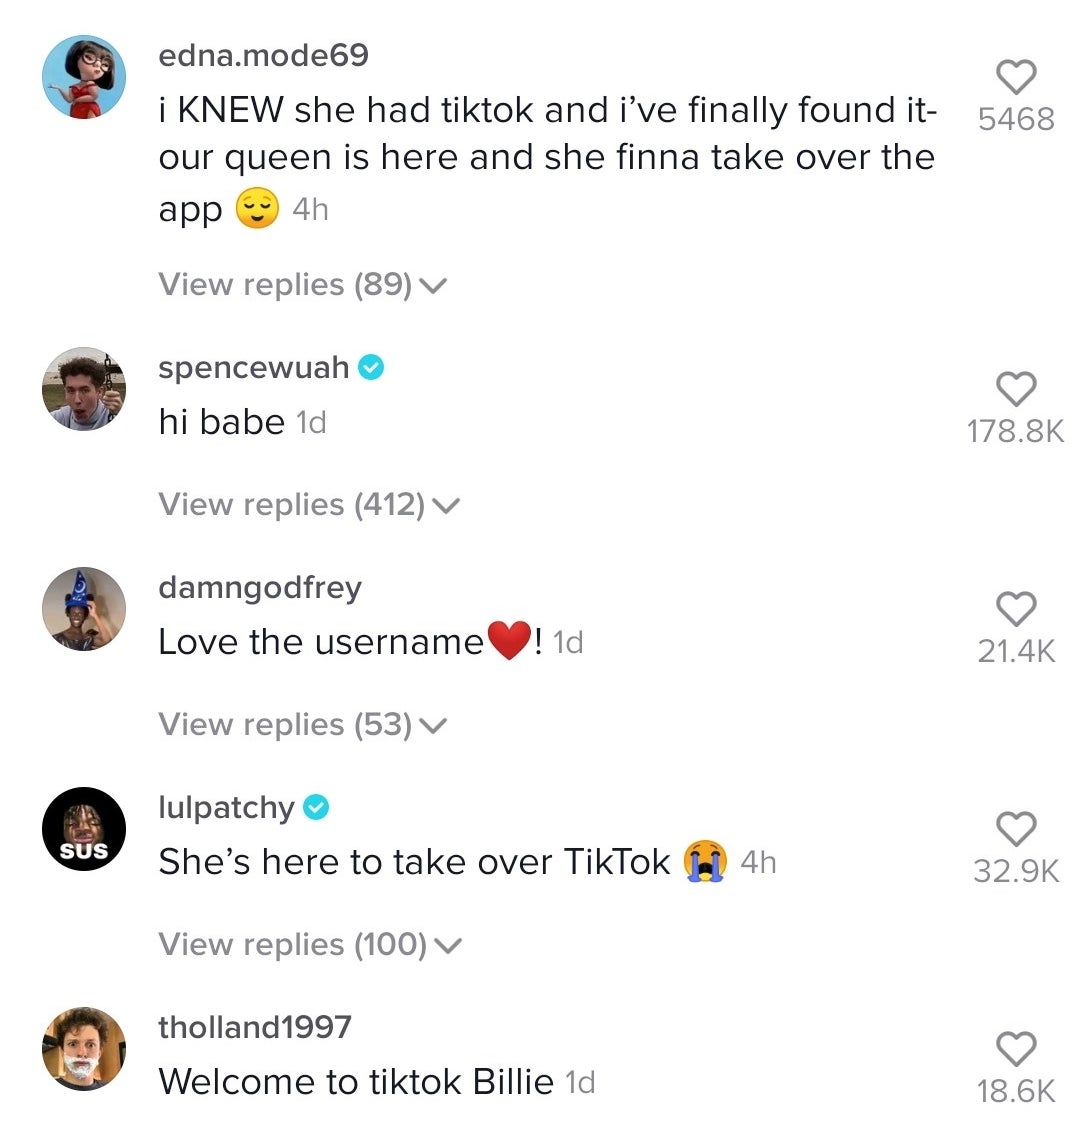 Fans freak out over the fact that Billie joined TikTok with comments like &quot;Welcome to TikTok, Billie&quot; 